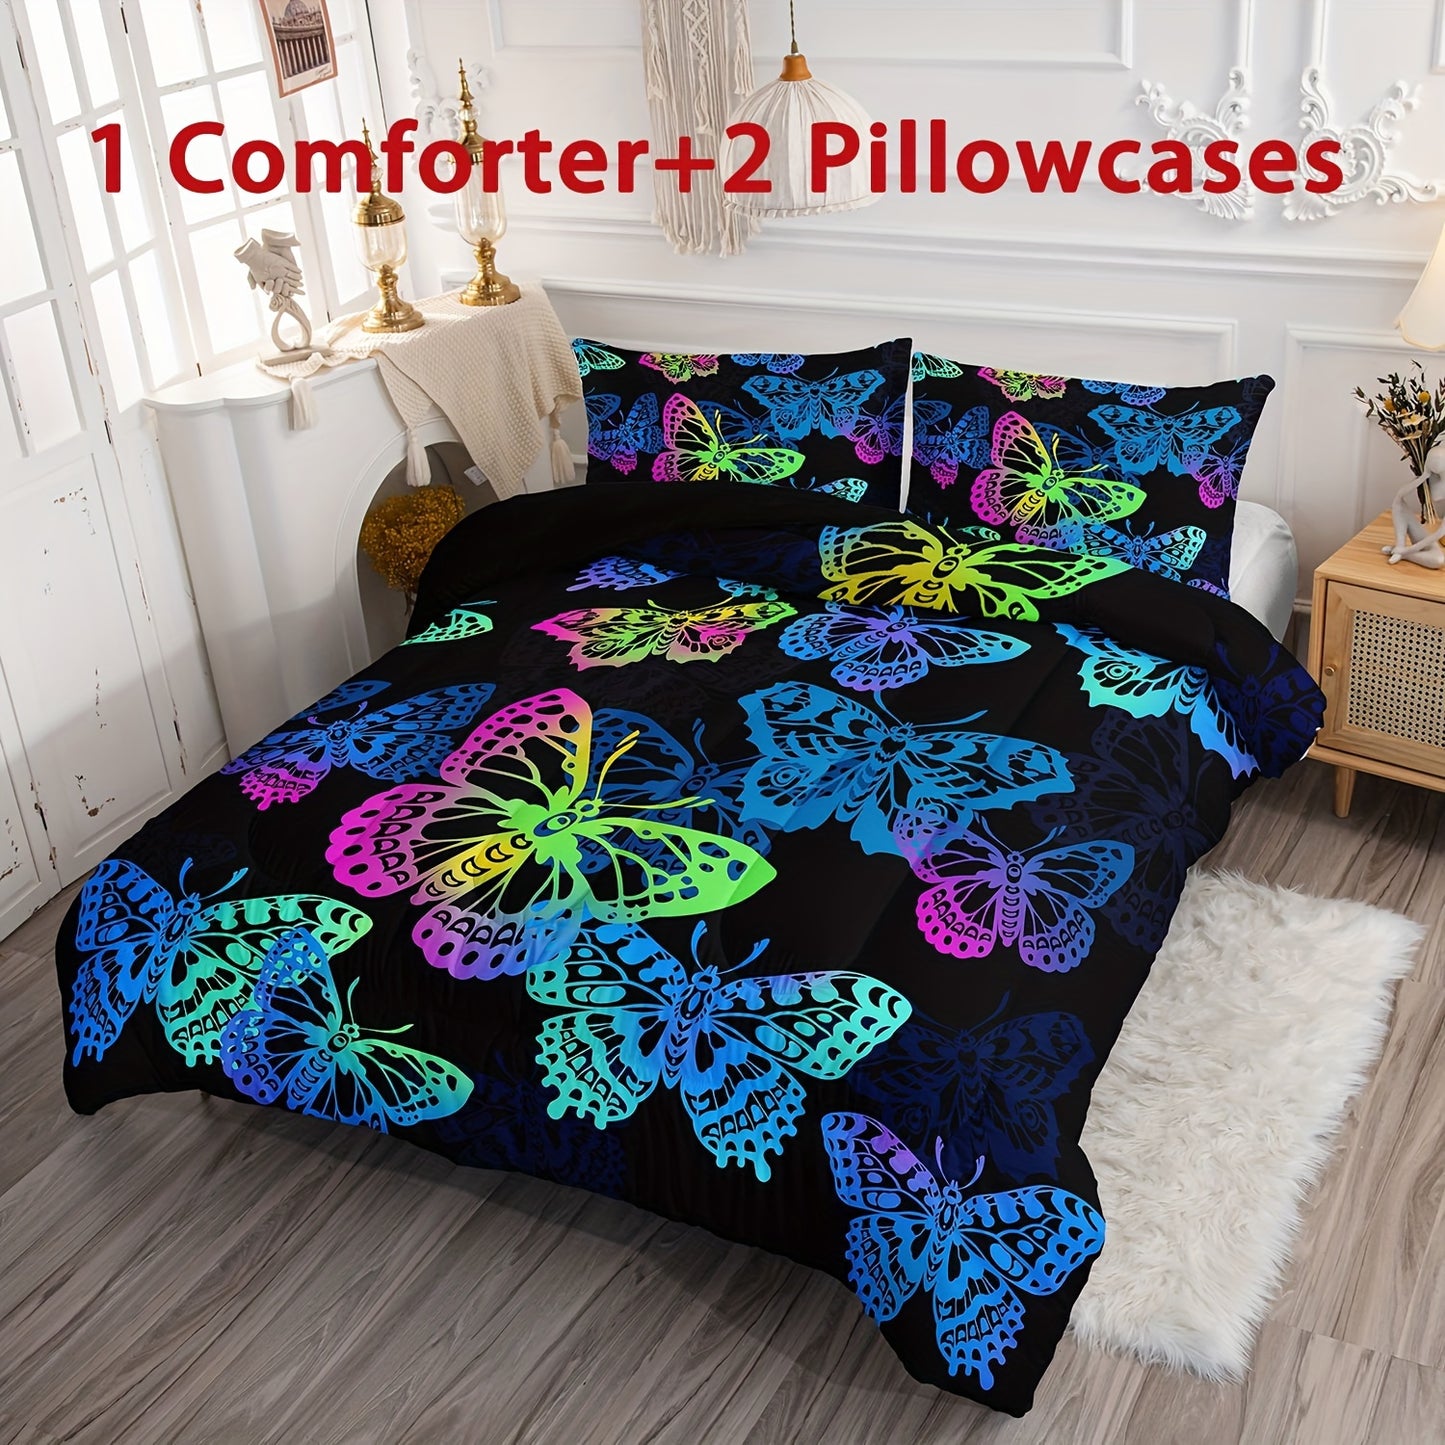 3pcs Colorful Butterflies Print Comforter Set For Girls Teens Boys, Soft Comfortable Comfortable Bedding Set, For Bedroom Guest Room Dorm (1*Comforter + 2*Pillowcase, Without Core)